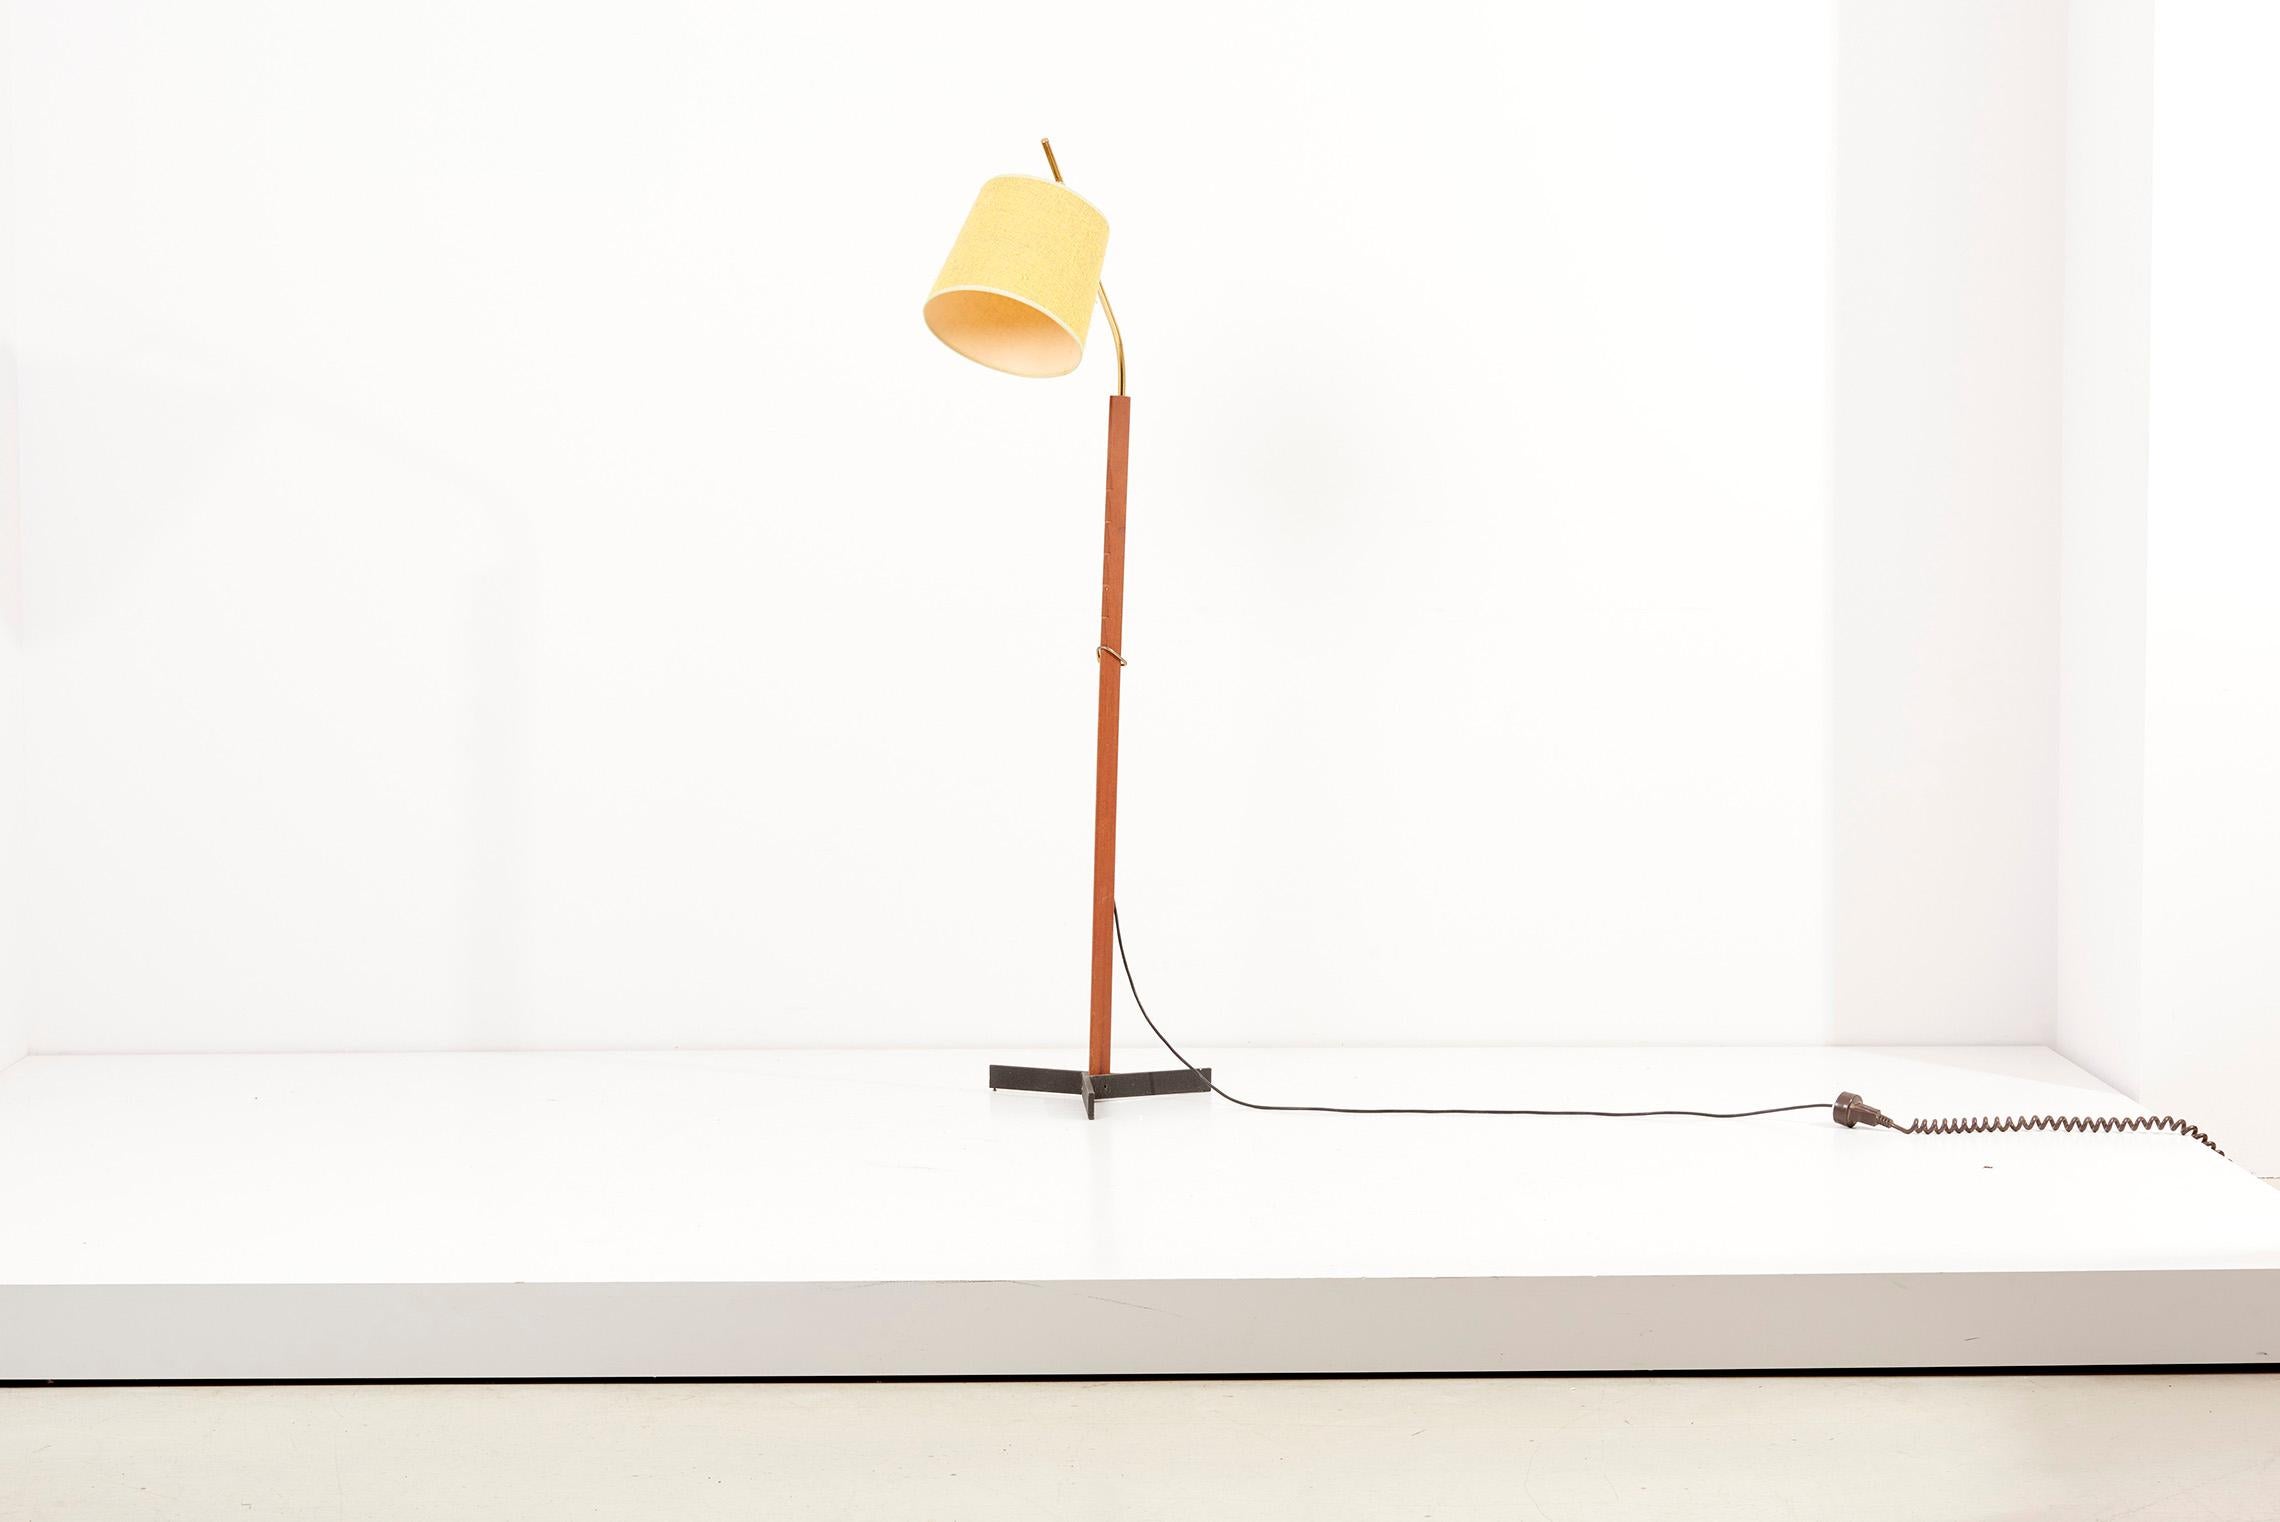 Floor lamp by Svend Aage Holm Sorensen with yellow bouclé shade. The diameter given applies to the size of the pedestal. The lampshade measures 22cm height / 26cm diameter.